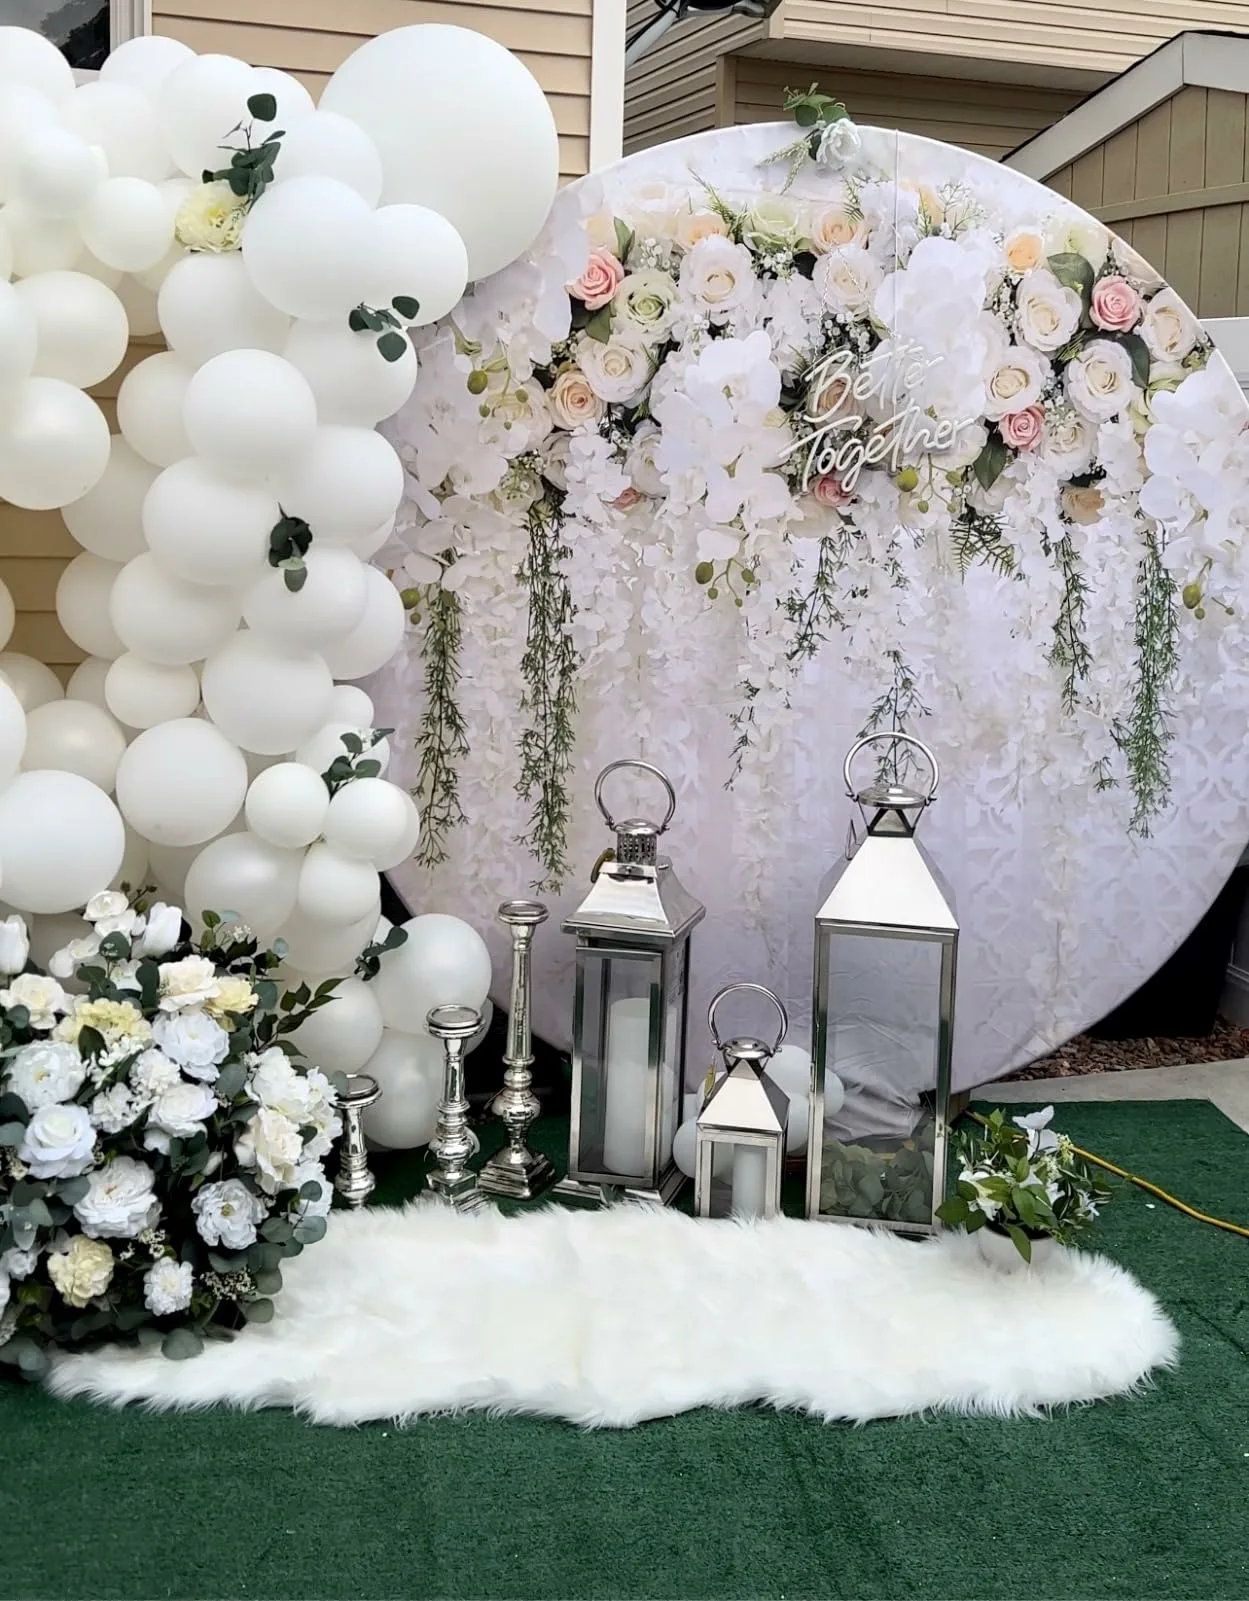 White Ledsign Better Together Silver Lamp White Fur Green Grass Mat Angle View Outdoor Lights For Wedding